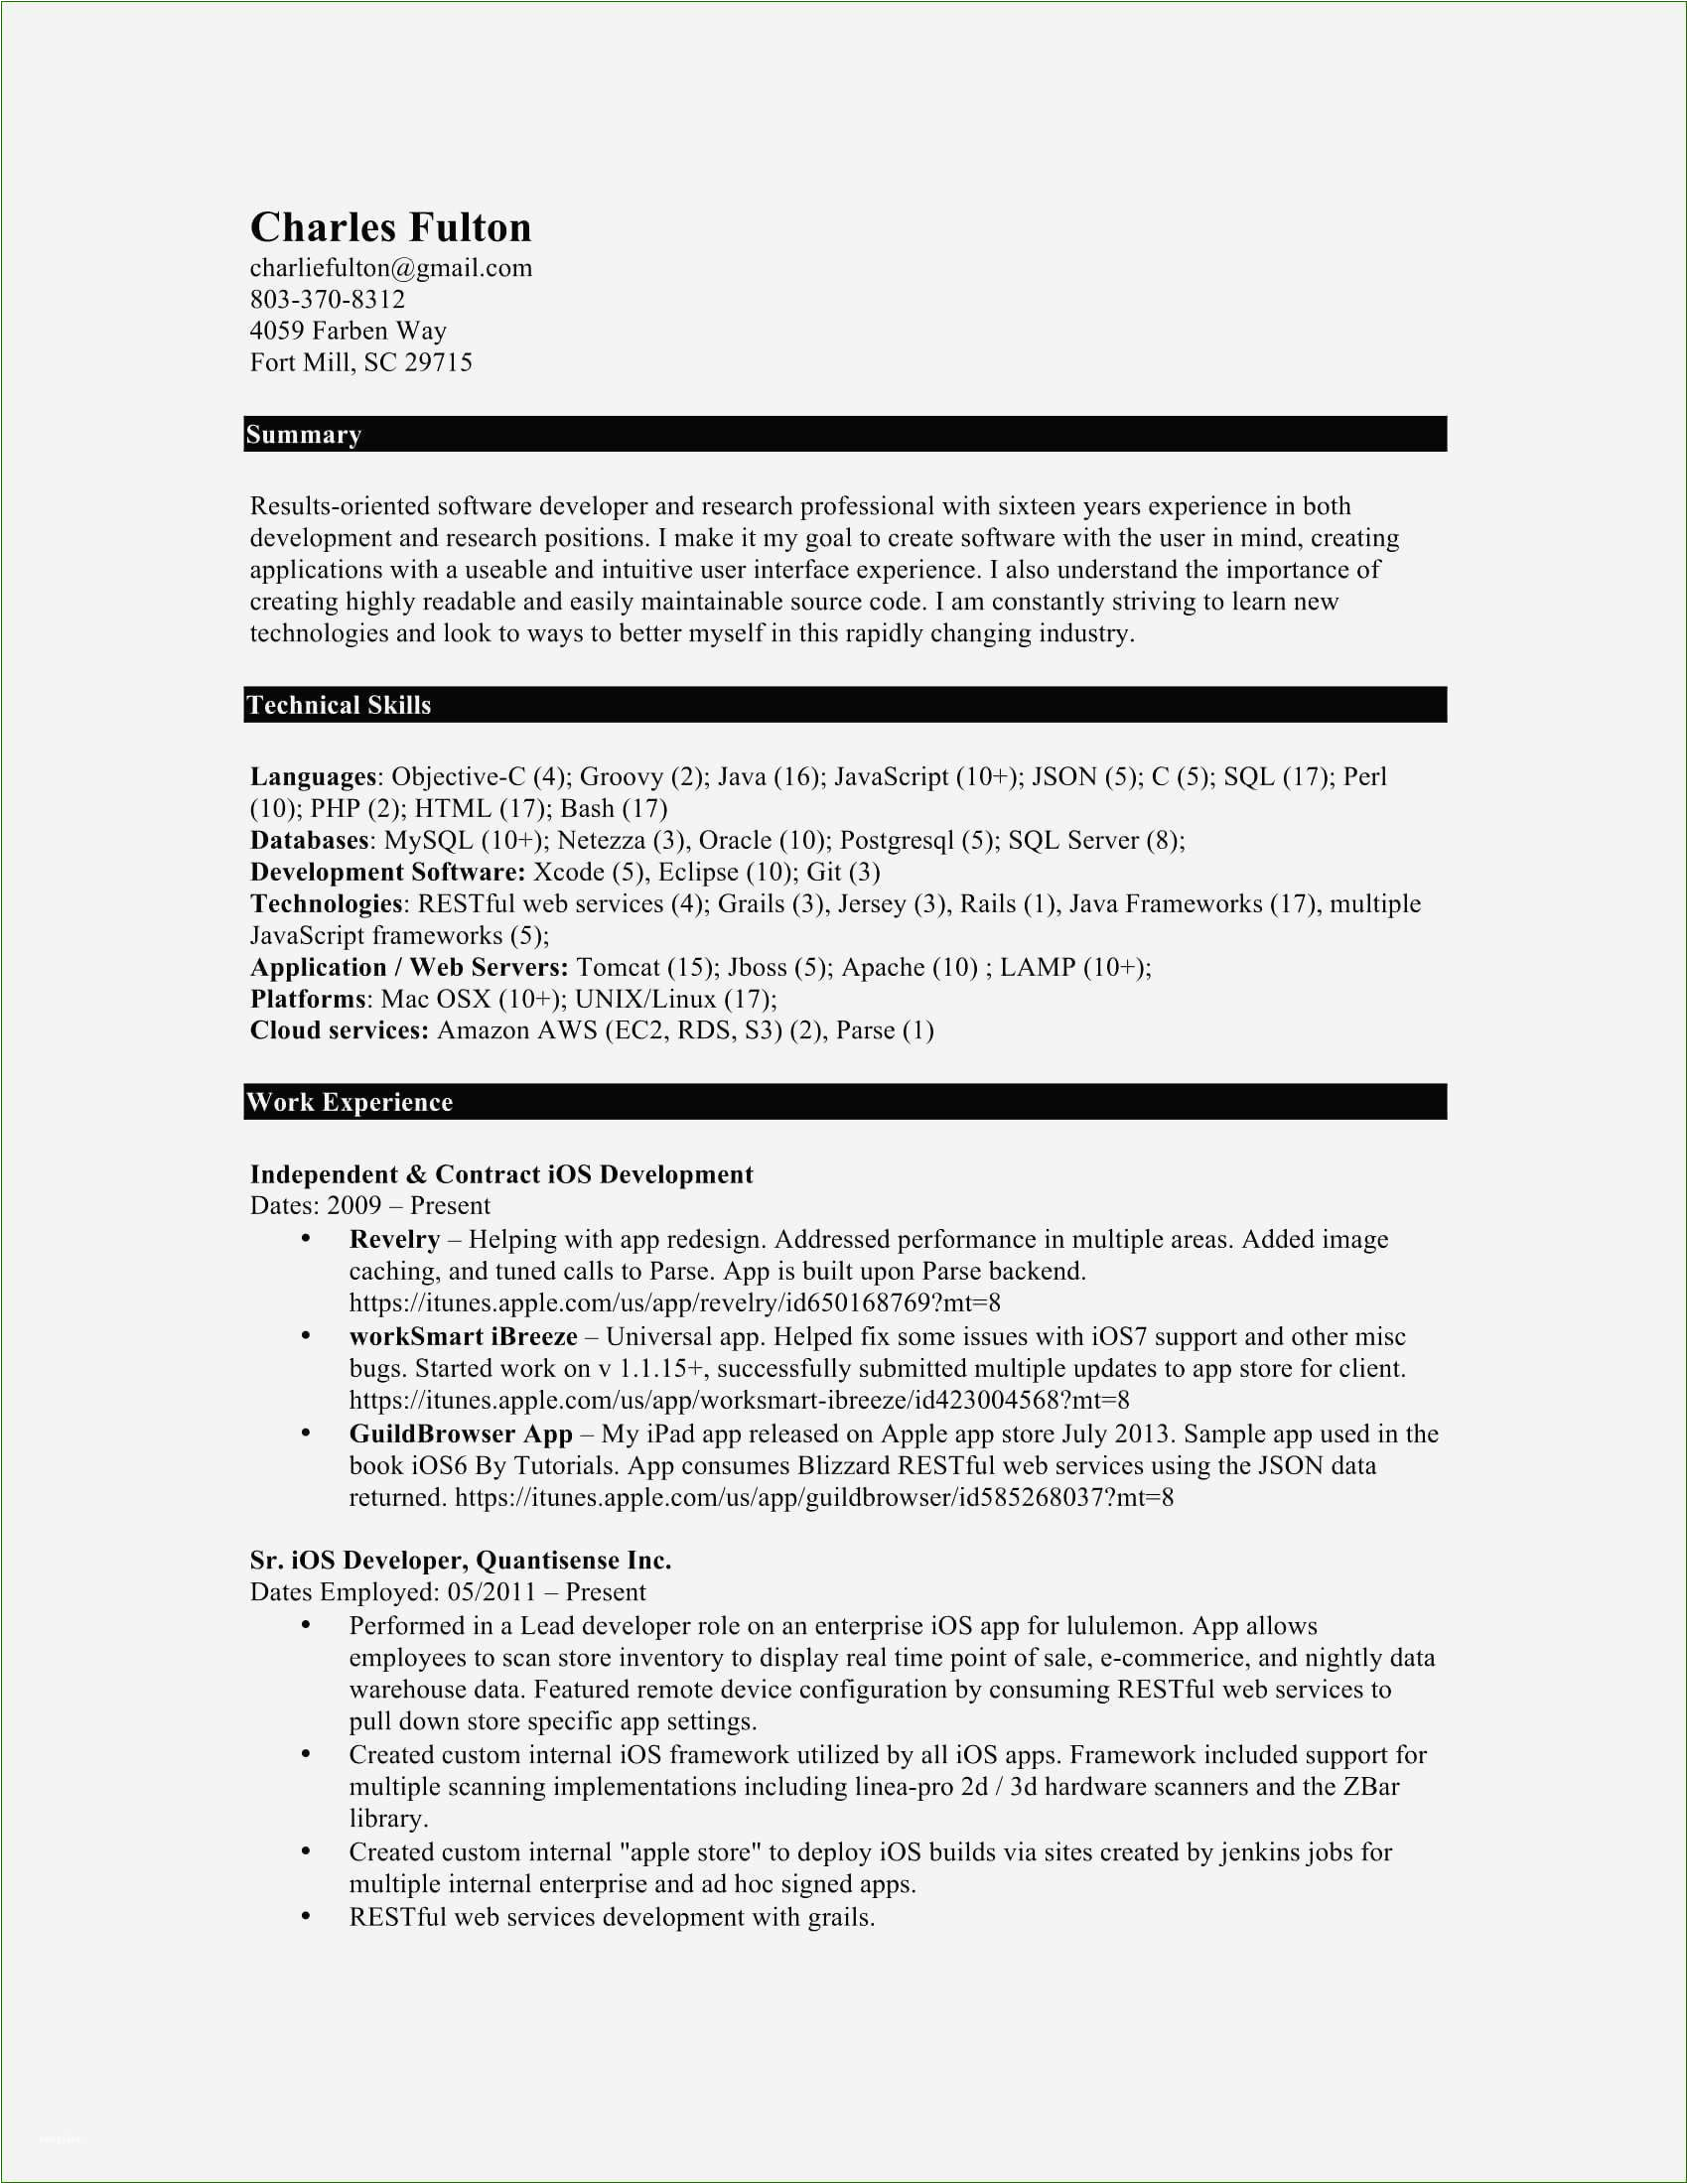 Sample Resume for software Engineer with 10 Years Experience 10 Years Experience software Engineer Resume